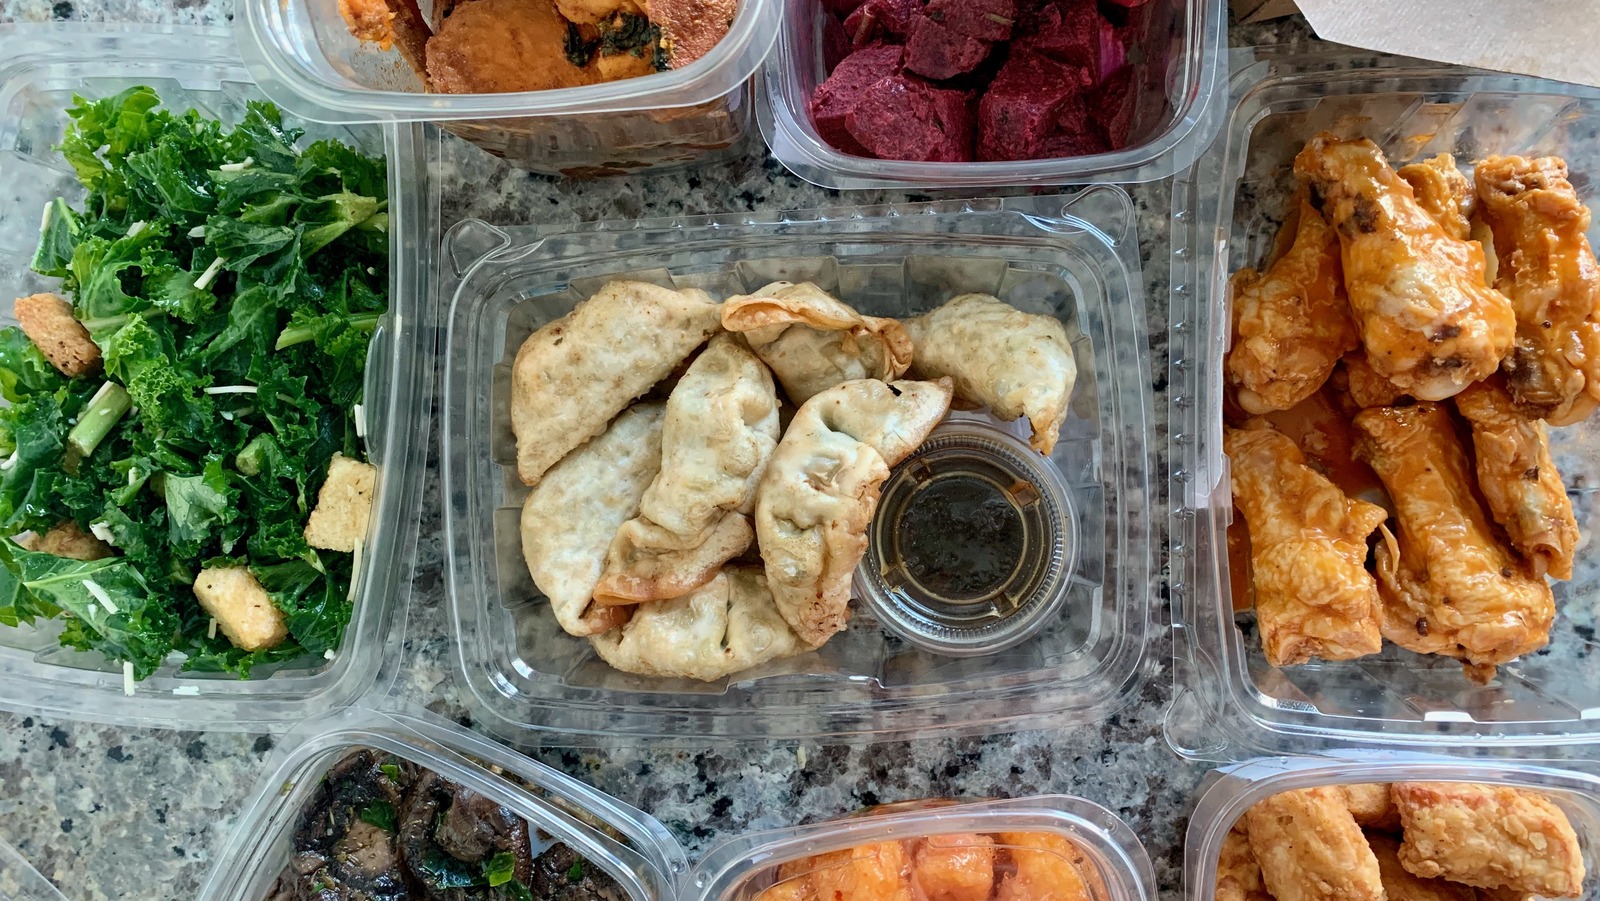 Prepared Foods at Whole Foods Market